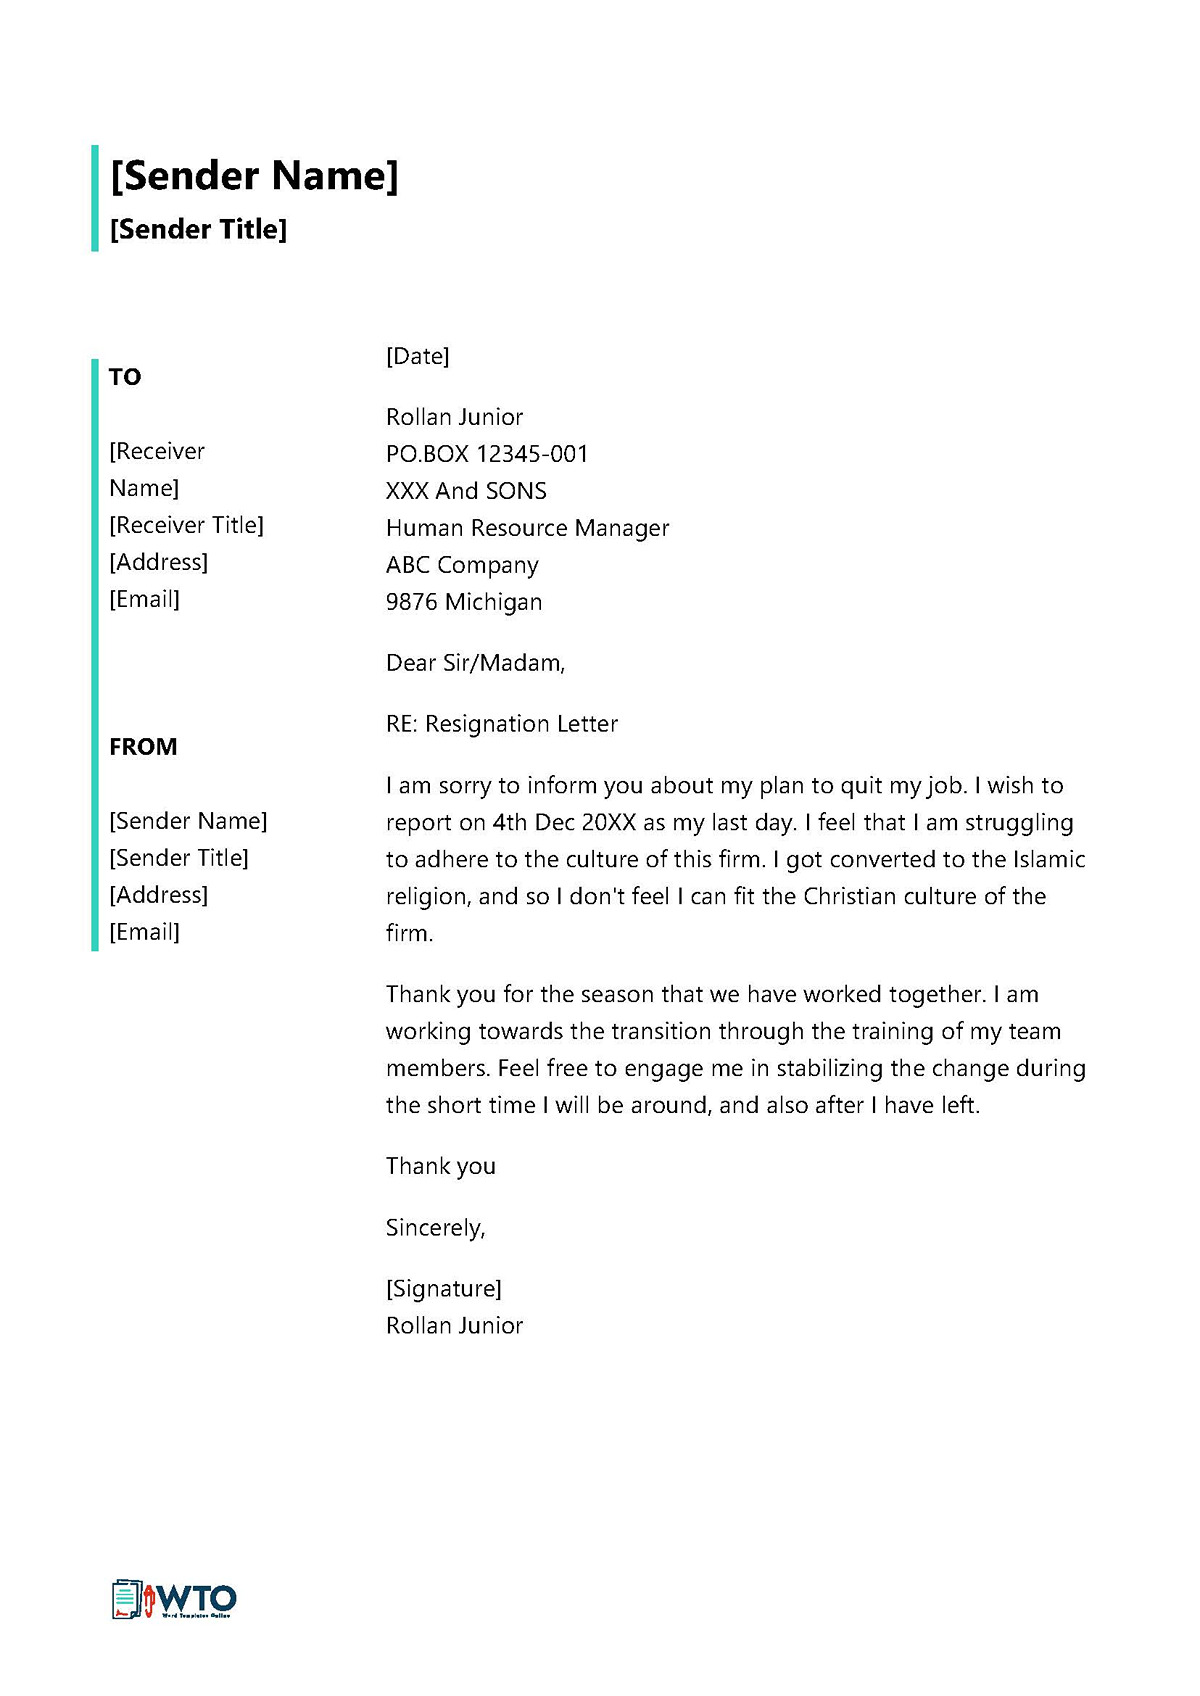 Resignation Letter - Customizable Content (Job Not a Good Fit)